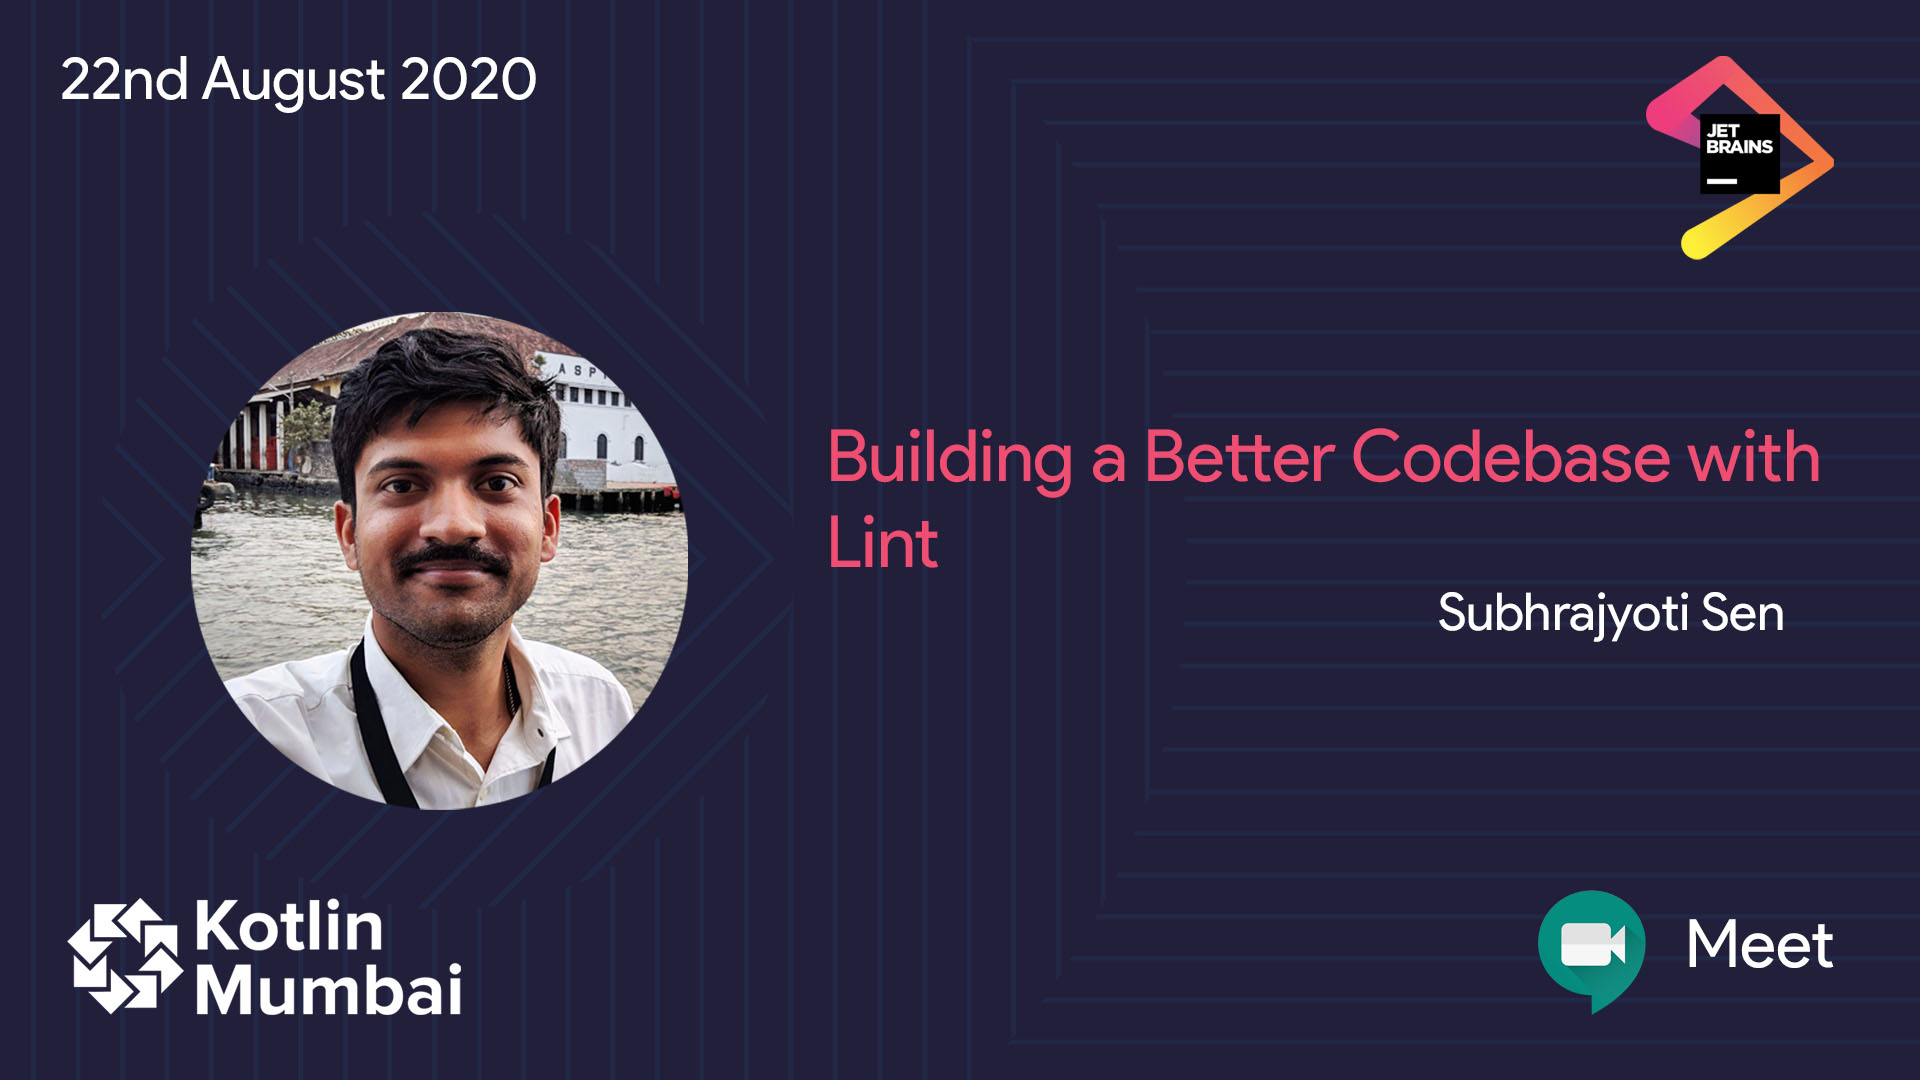 Subhrajyoti Sen talks about using lint in Android to build a better codebase